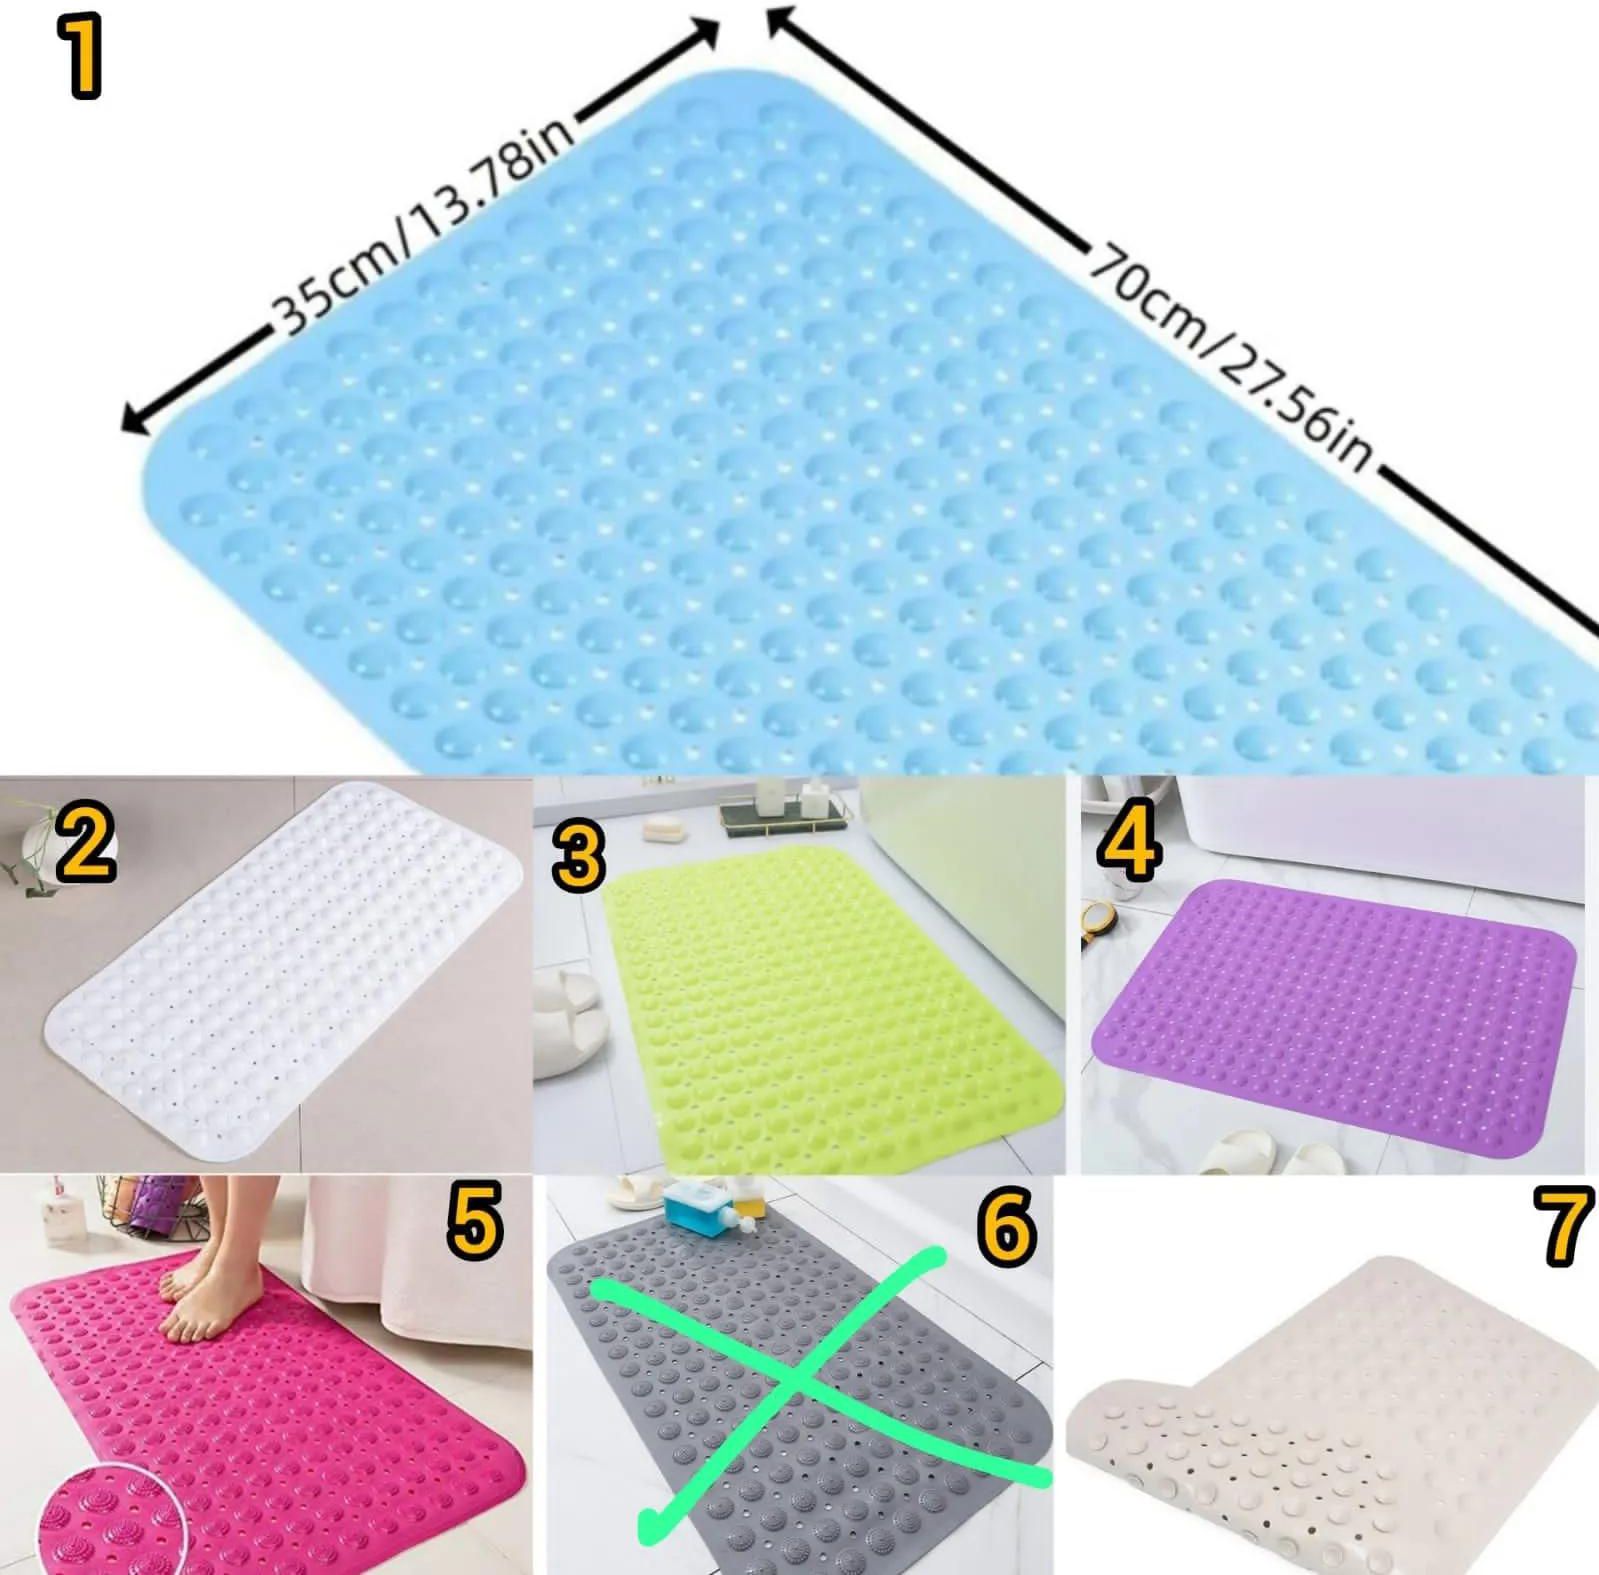 Generic Anti-slip Bathroom Mat Antislip Non Slip Safety Mat.Quality non-slip bathroom mat Designed with patterned rubber for anti-slip properties Easy to clean